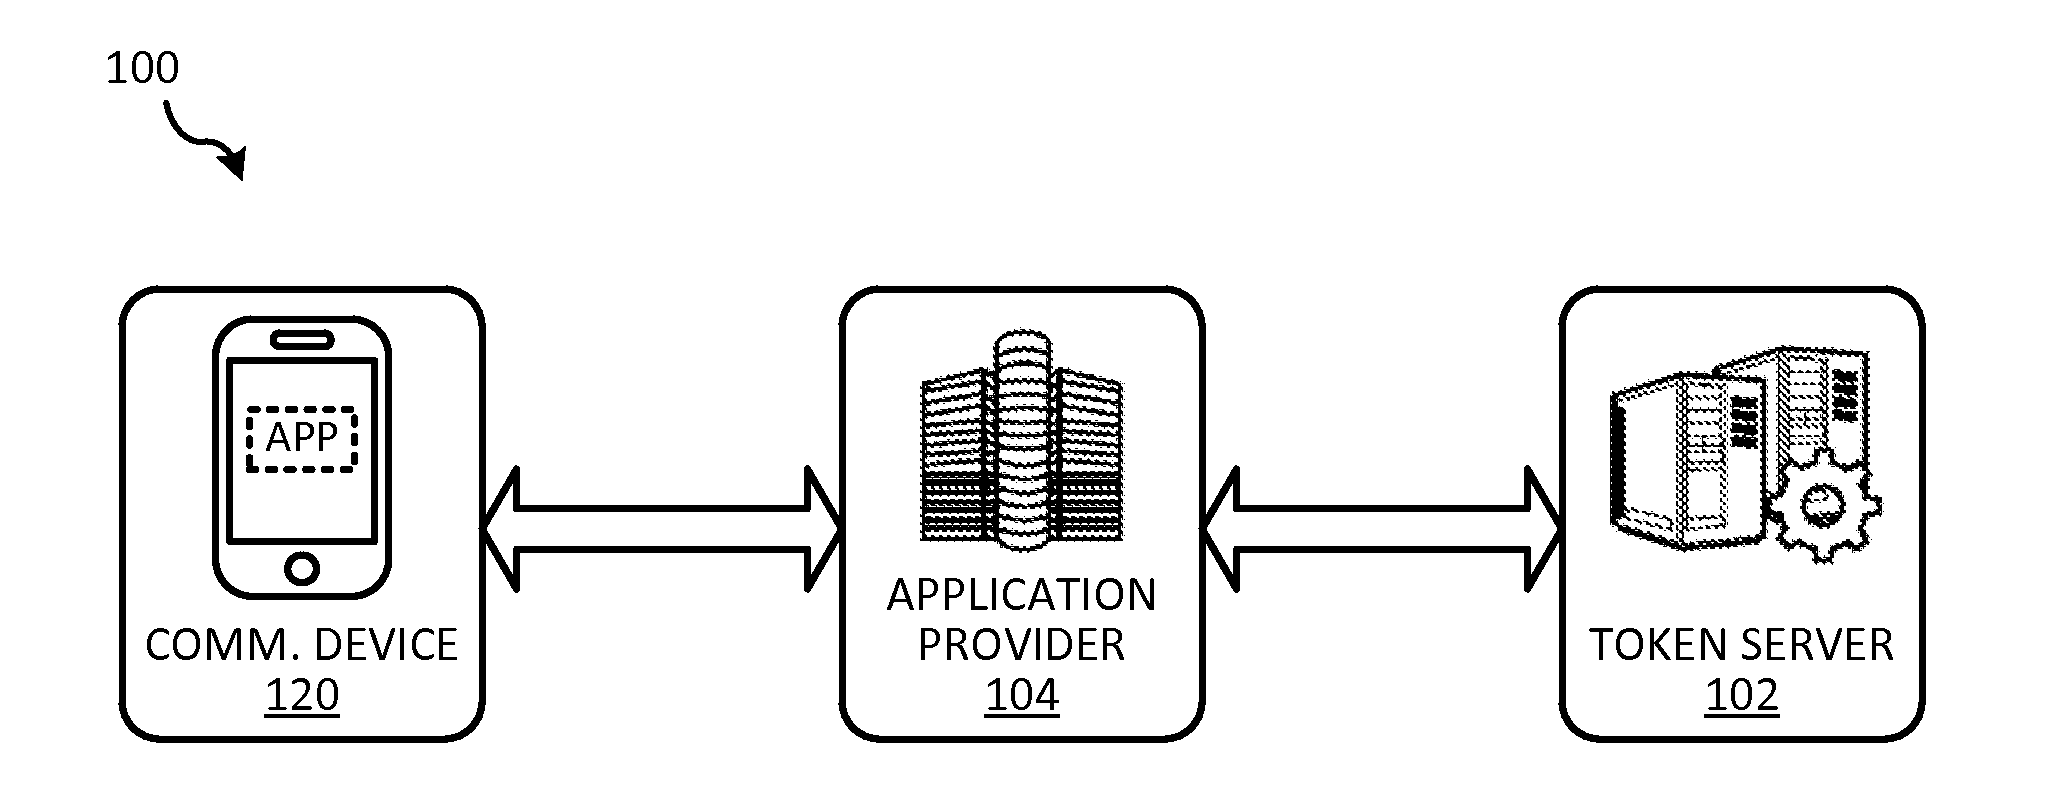 Token security on a communication device